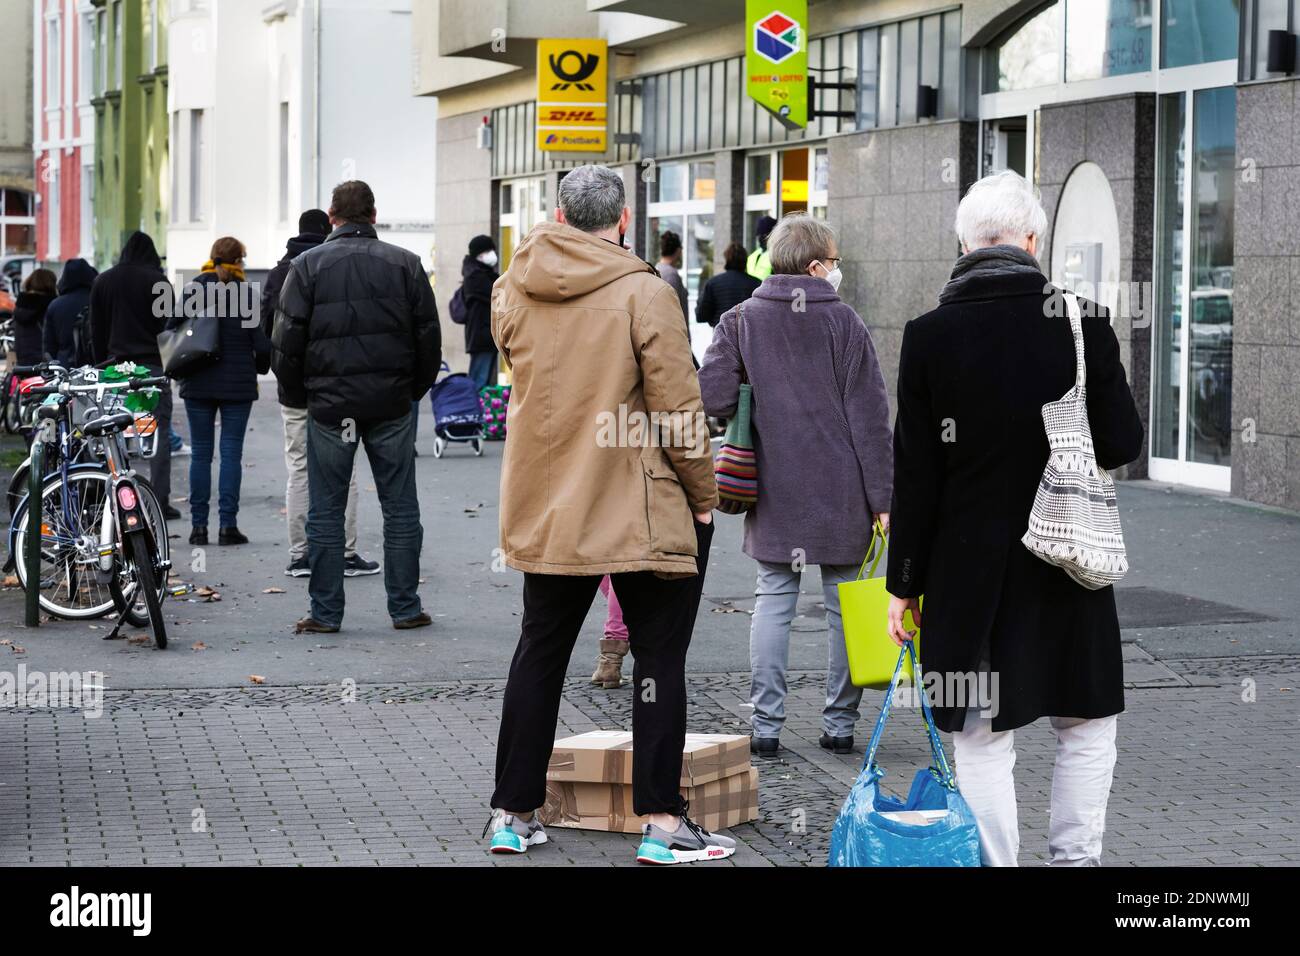 Dortmund, Germany, December 18th, 2020: Customers wait on the sidewalk in front of a branch of Deutsche Post / DHL in Dortmund. Due to the restrictions of the second lockdown of the corona pandemic, only 3 customers are allowed to stay in this branch at the same time. Stock Photo